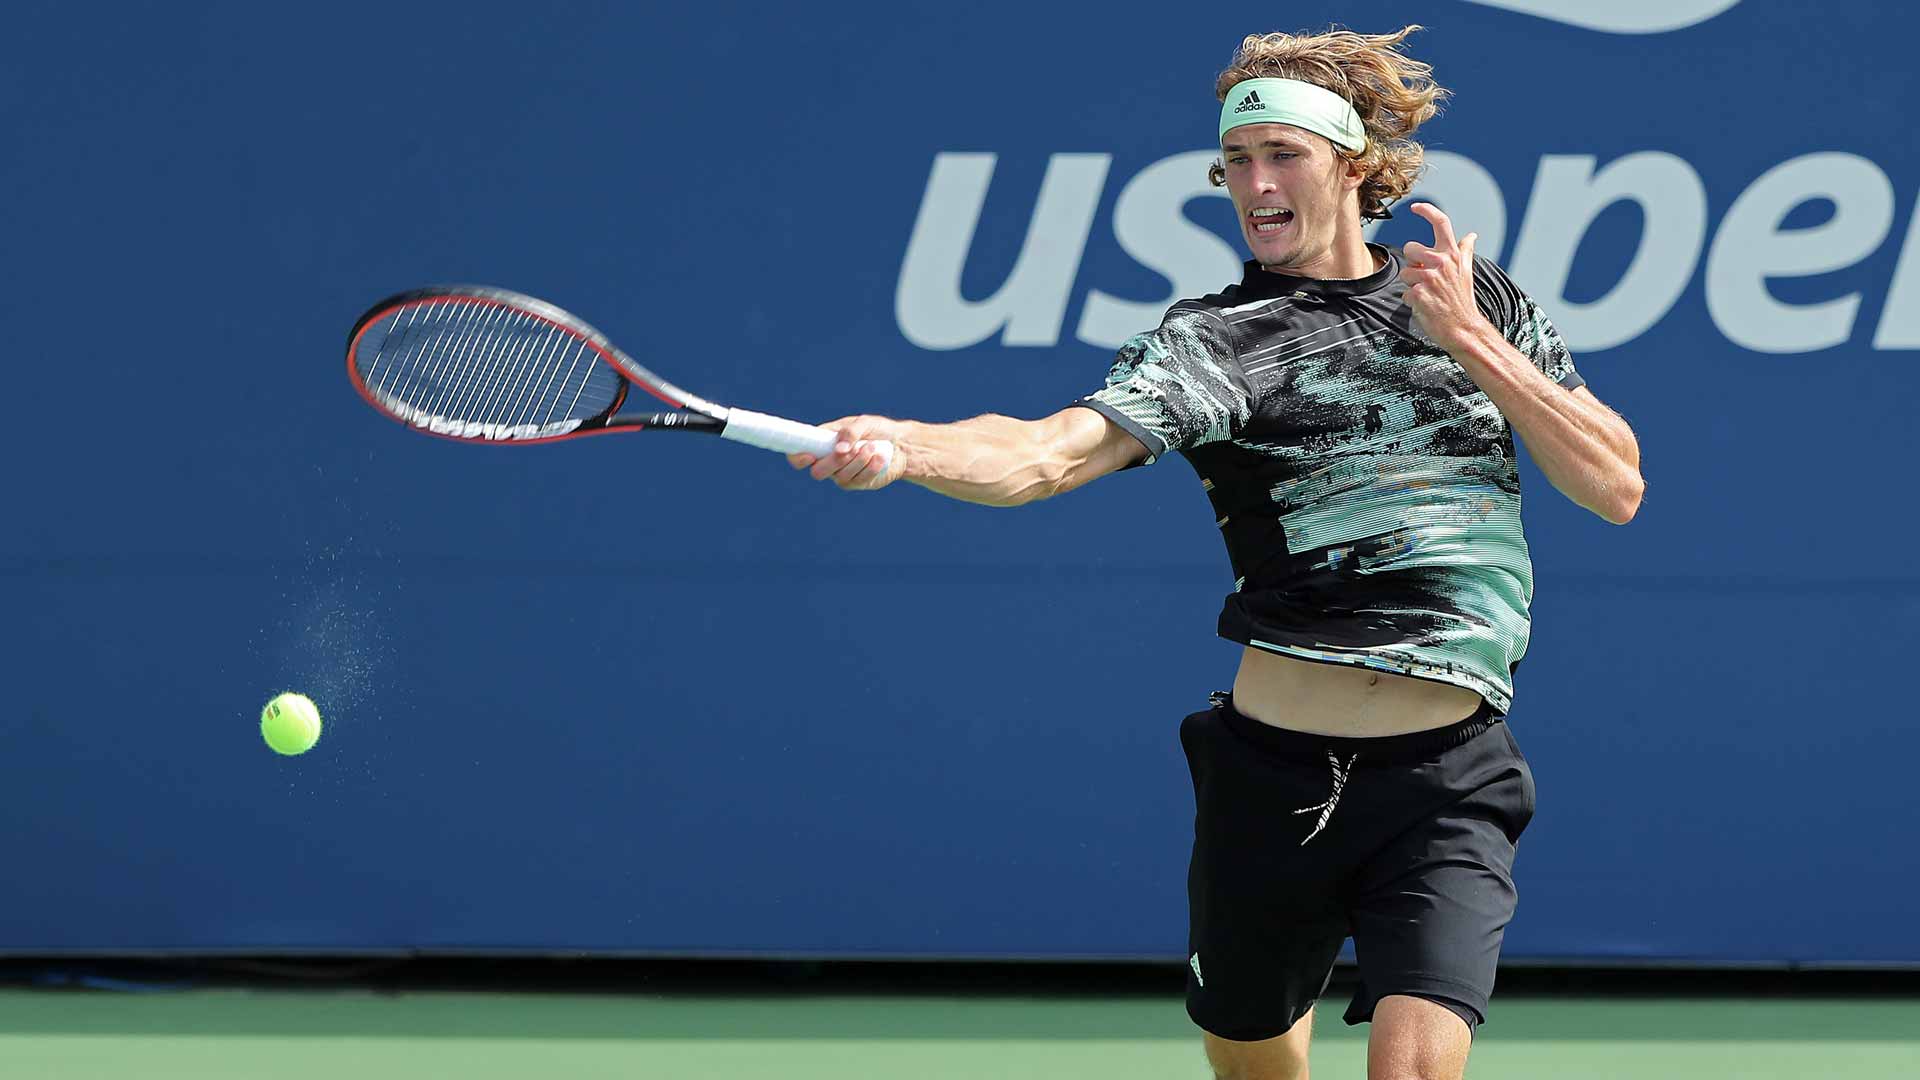 US Open 2021: Alexander Zverev beats Sam Querrey in straight sets 6-4, 7-5, 6-2 to move to 2nd round